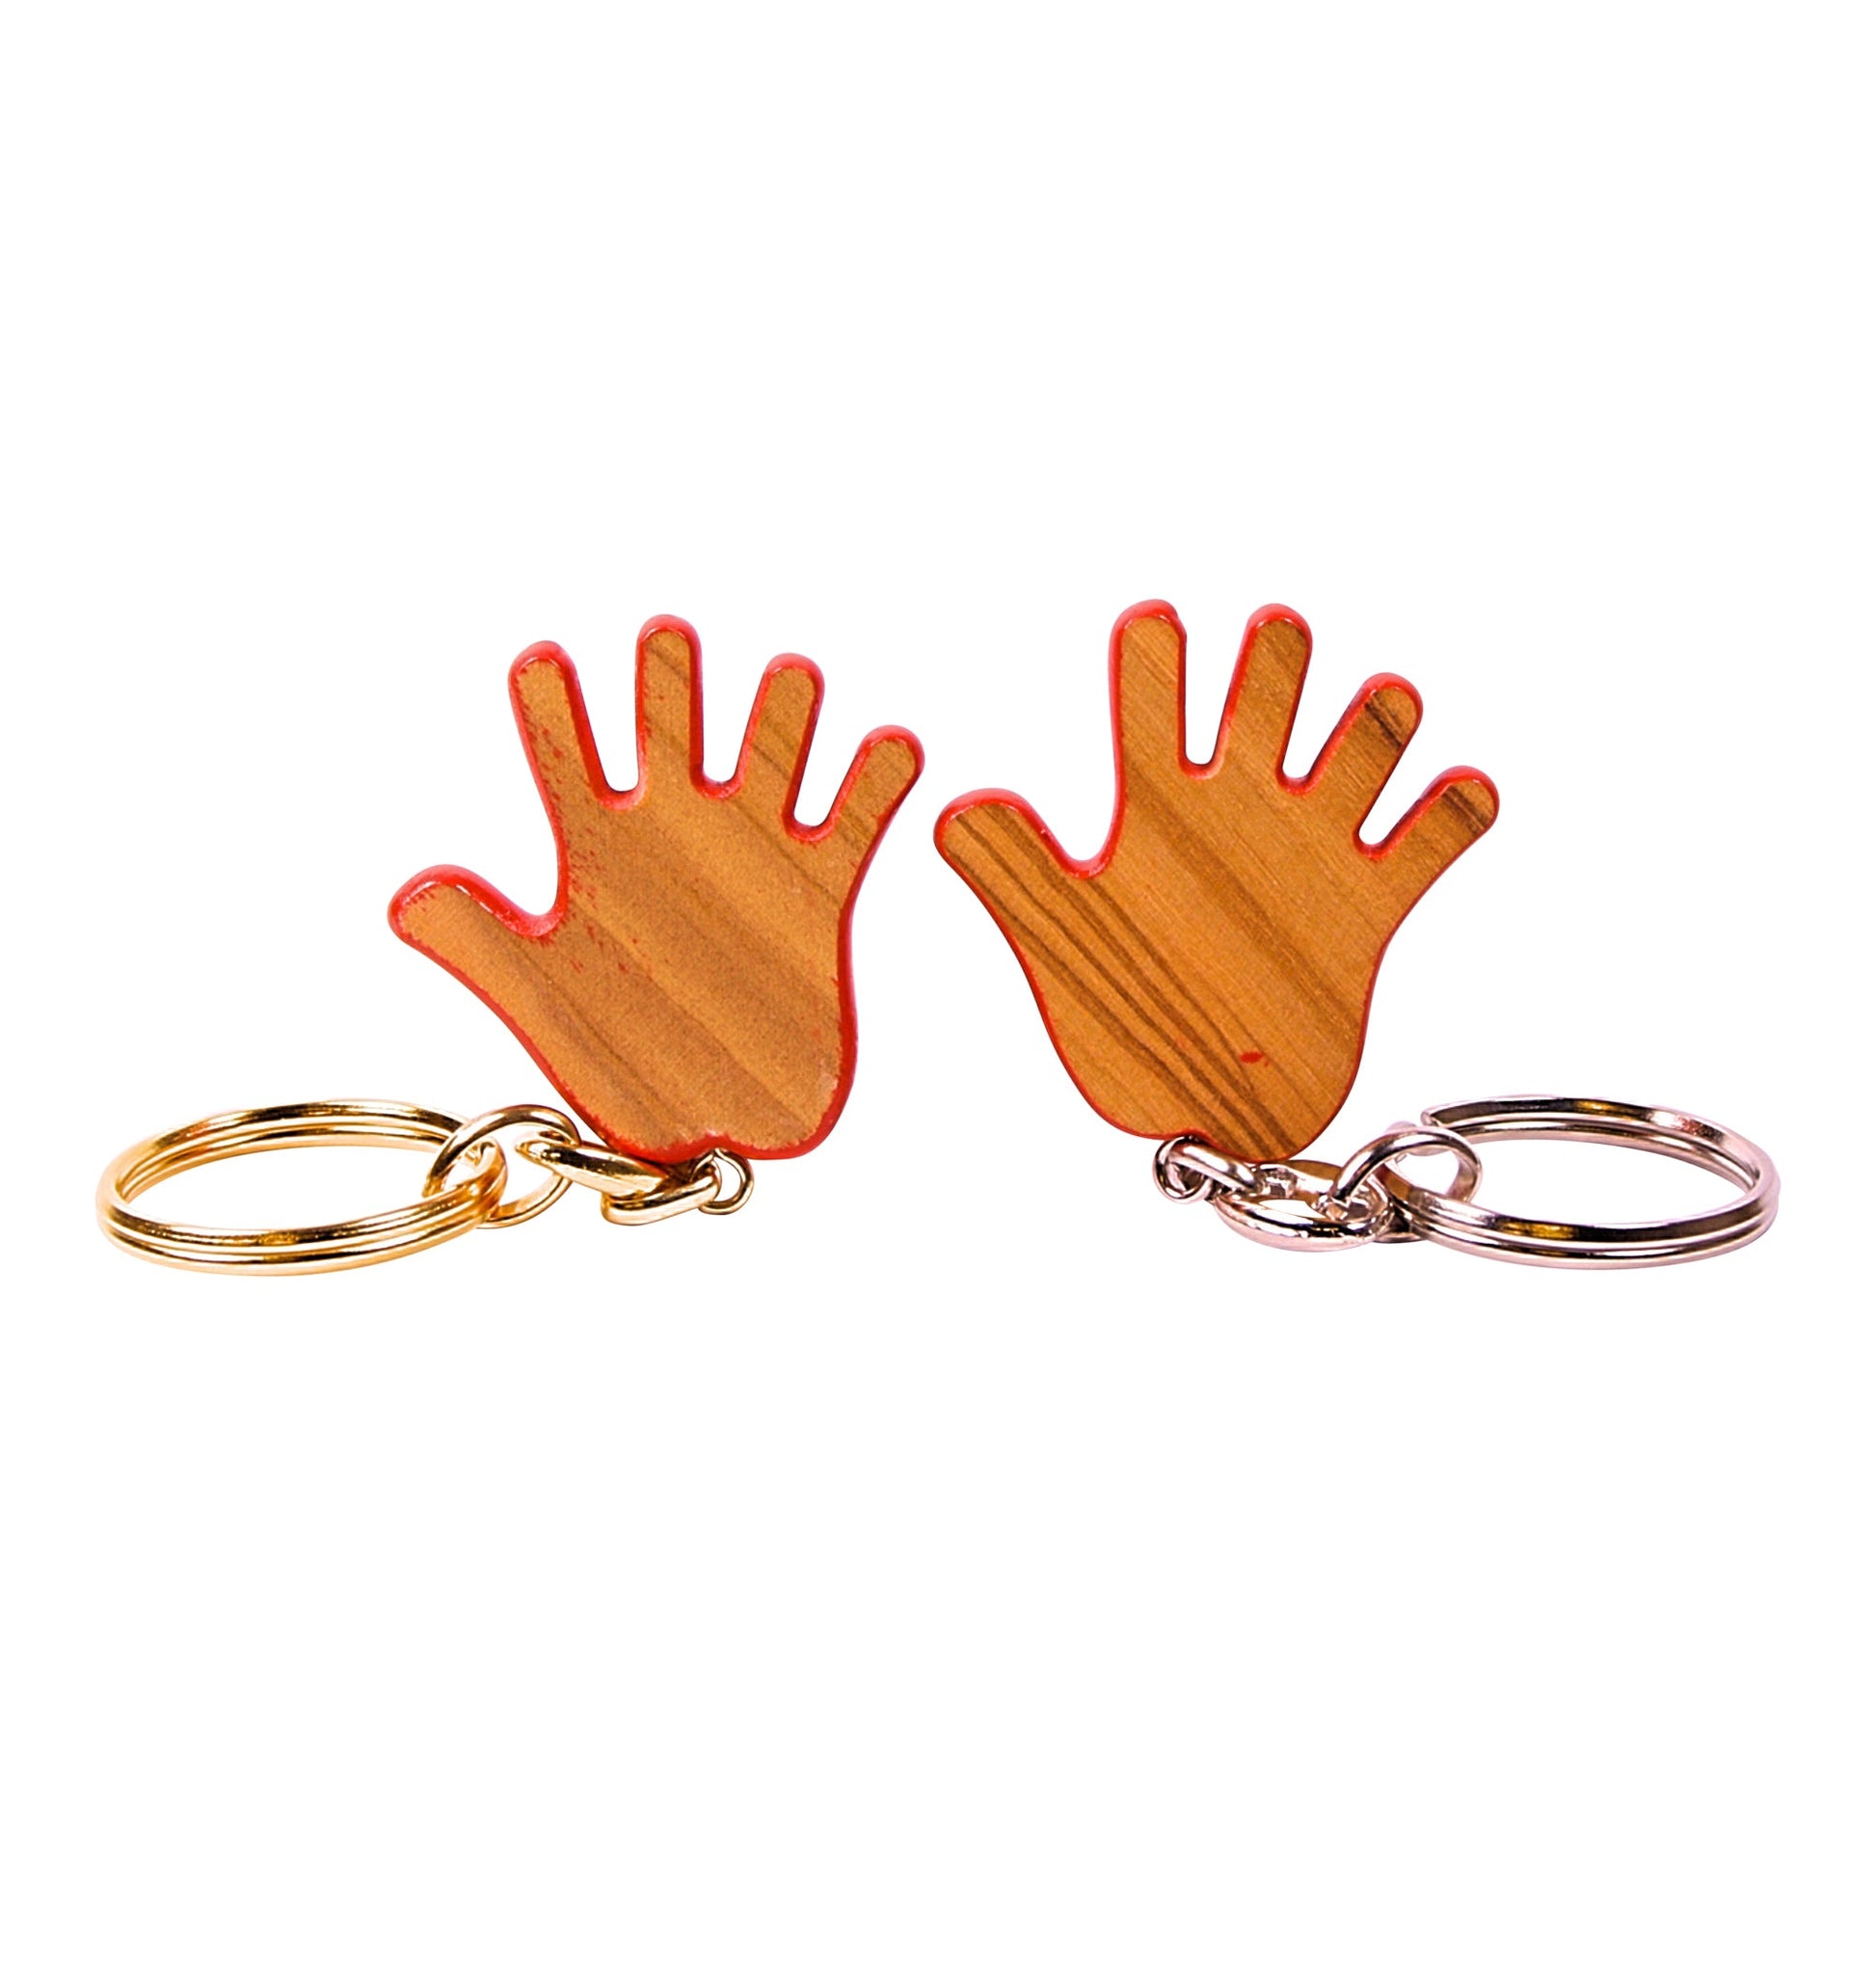 Two olive wood keychain pendants shaped like open hands with red-painted edges, one attached to a gold-toned metal ring and the other to a silver-toned metal ring.